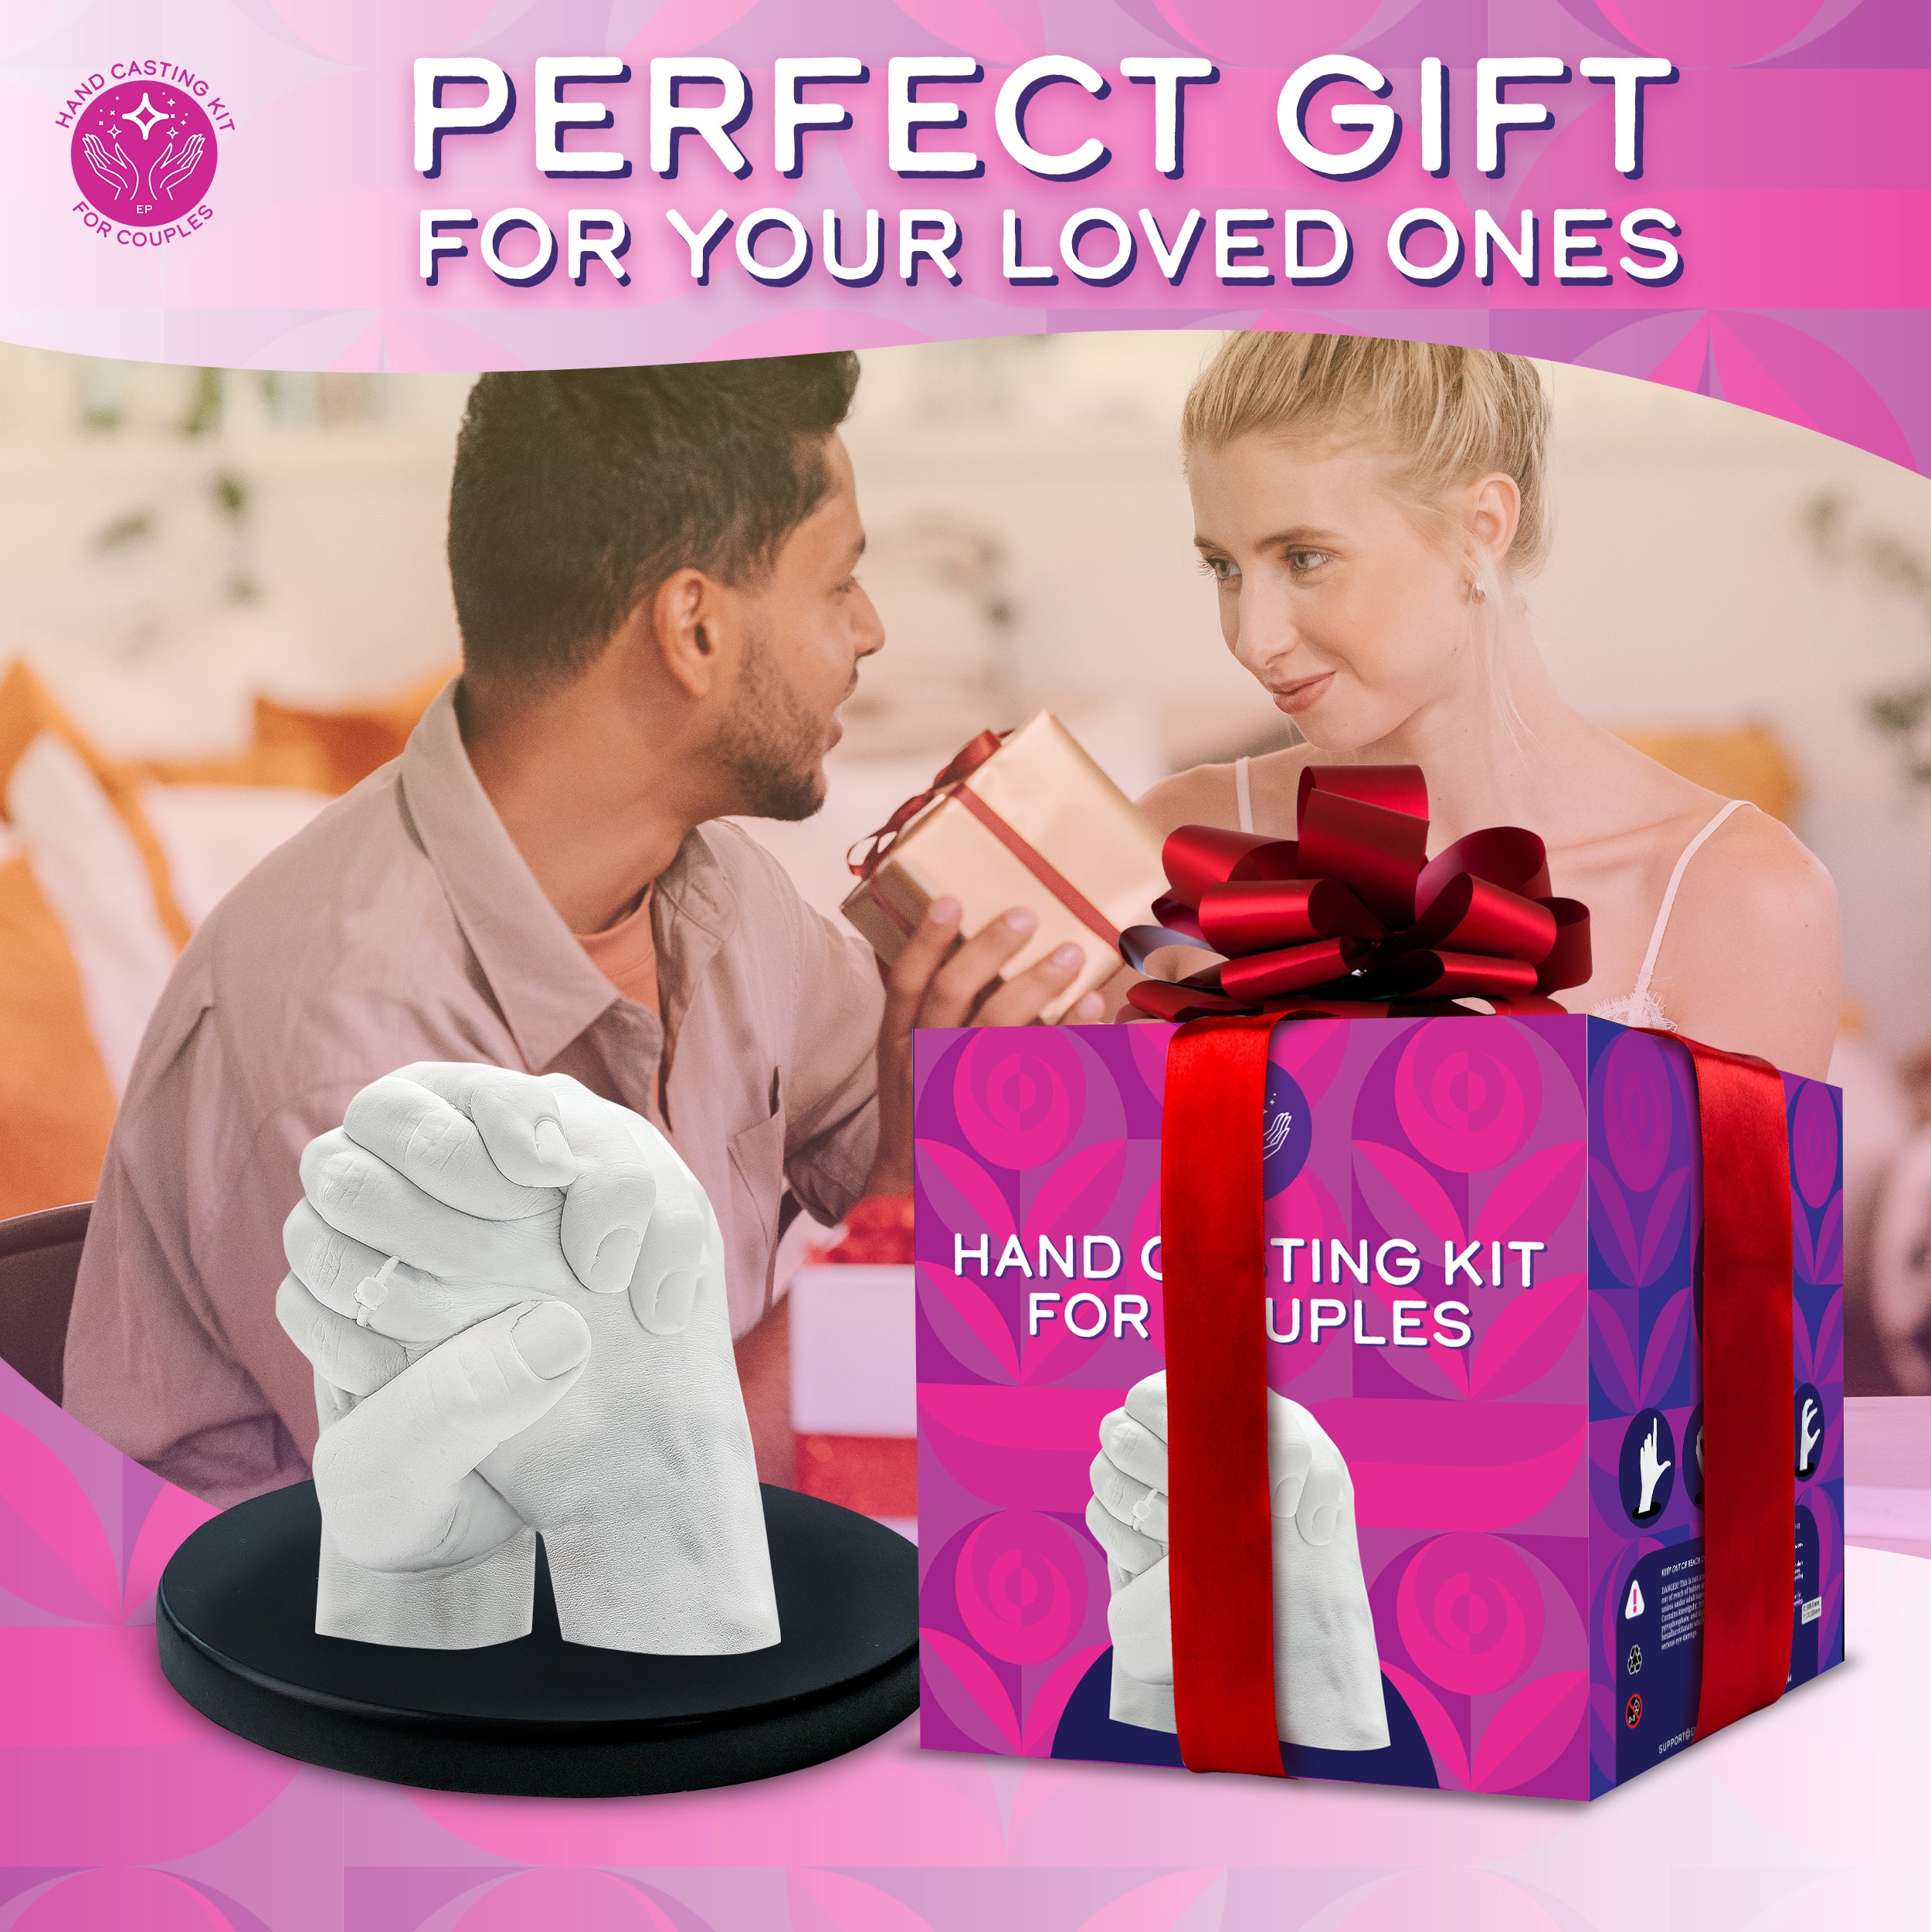 Hand Casting Kit for Couples